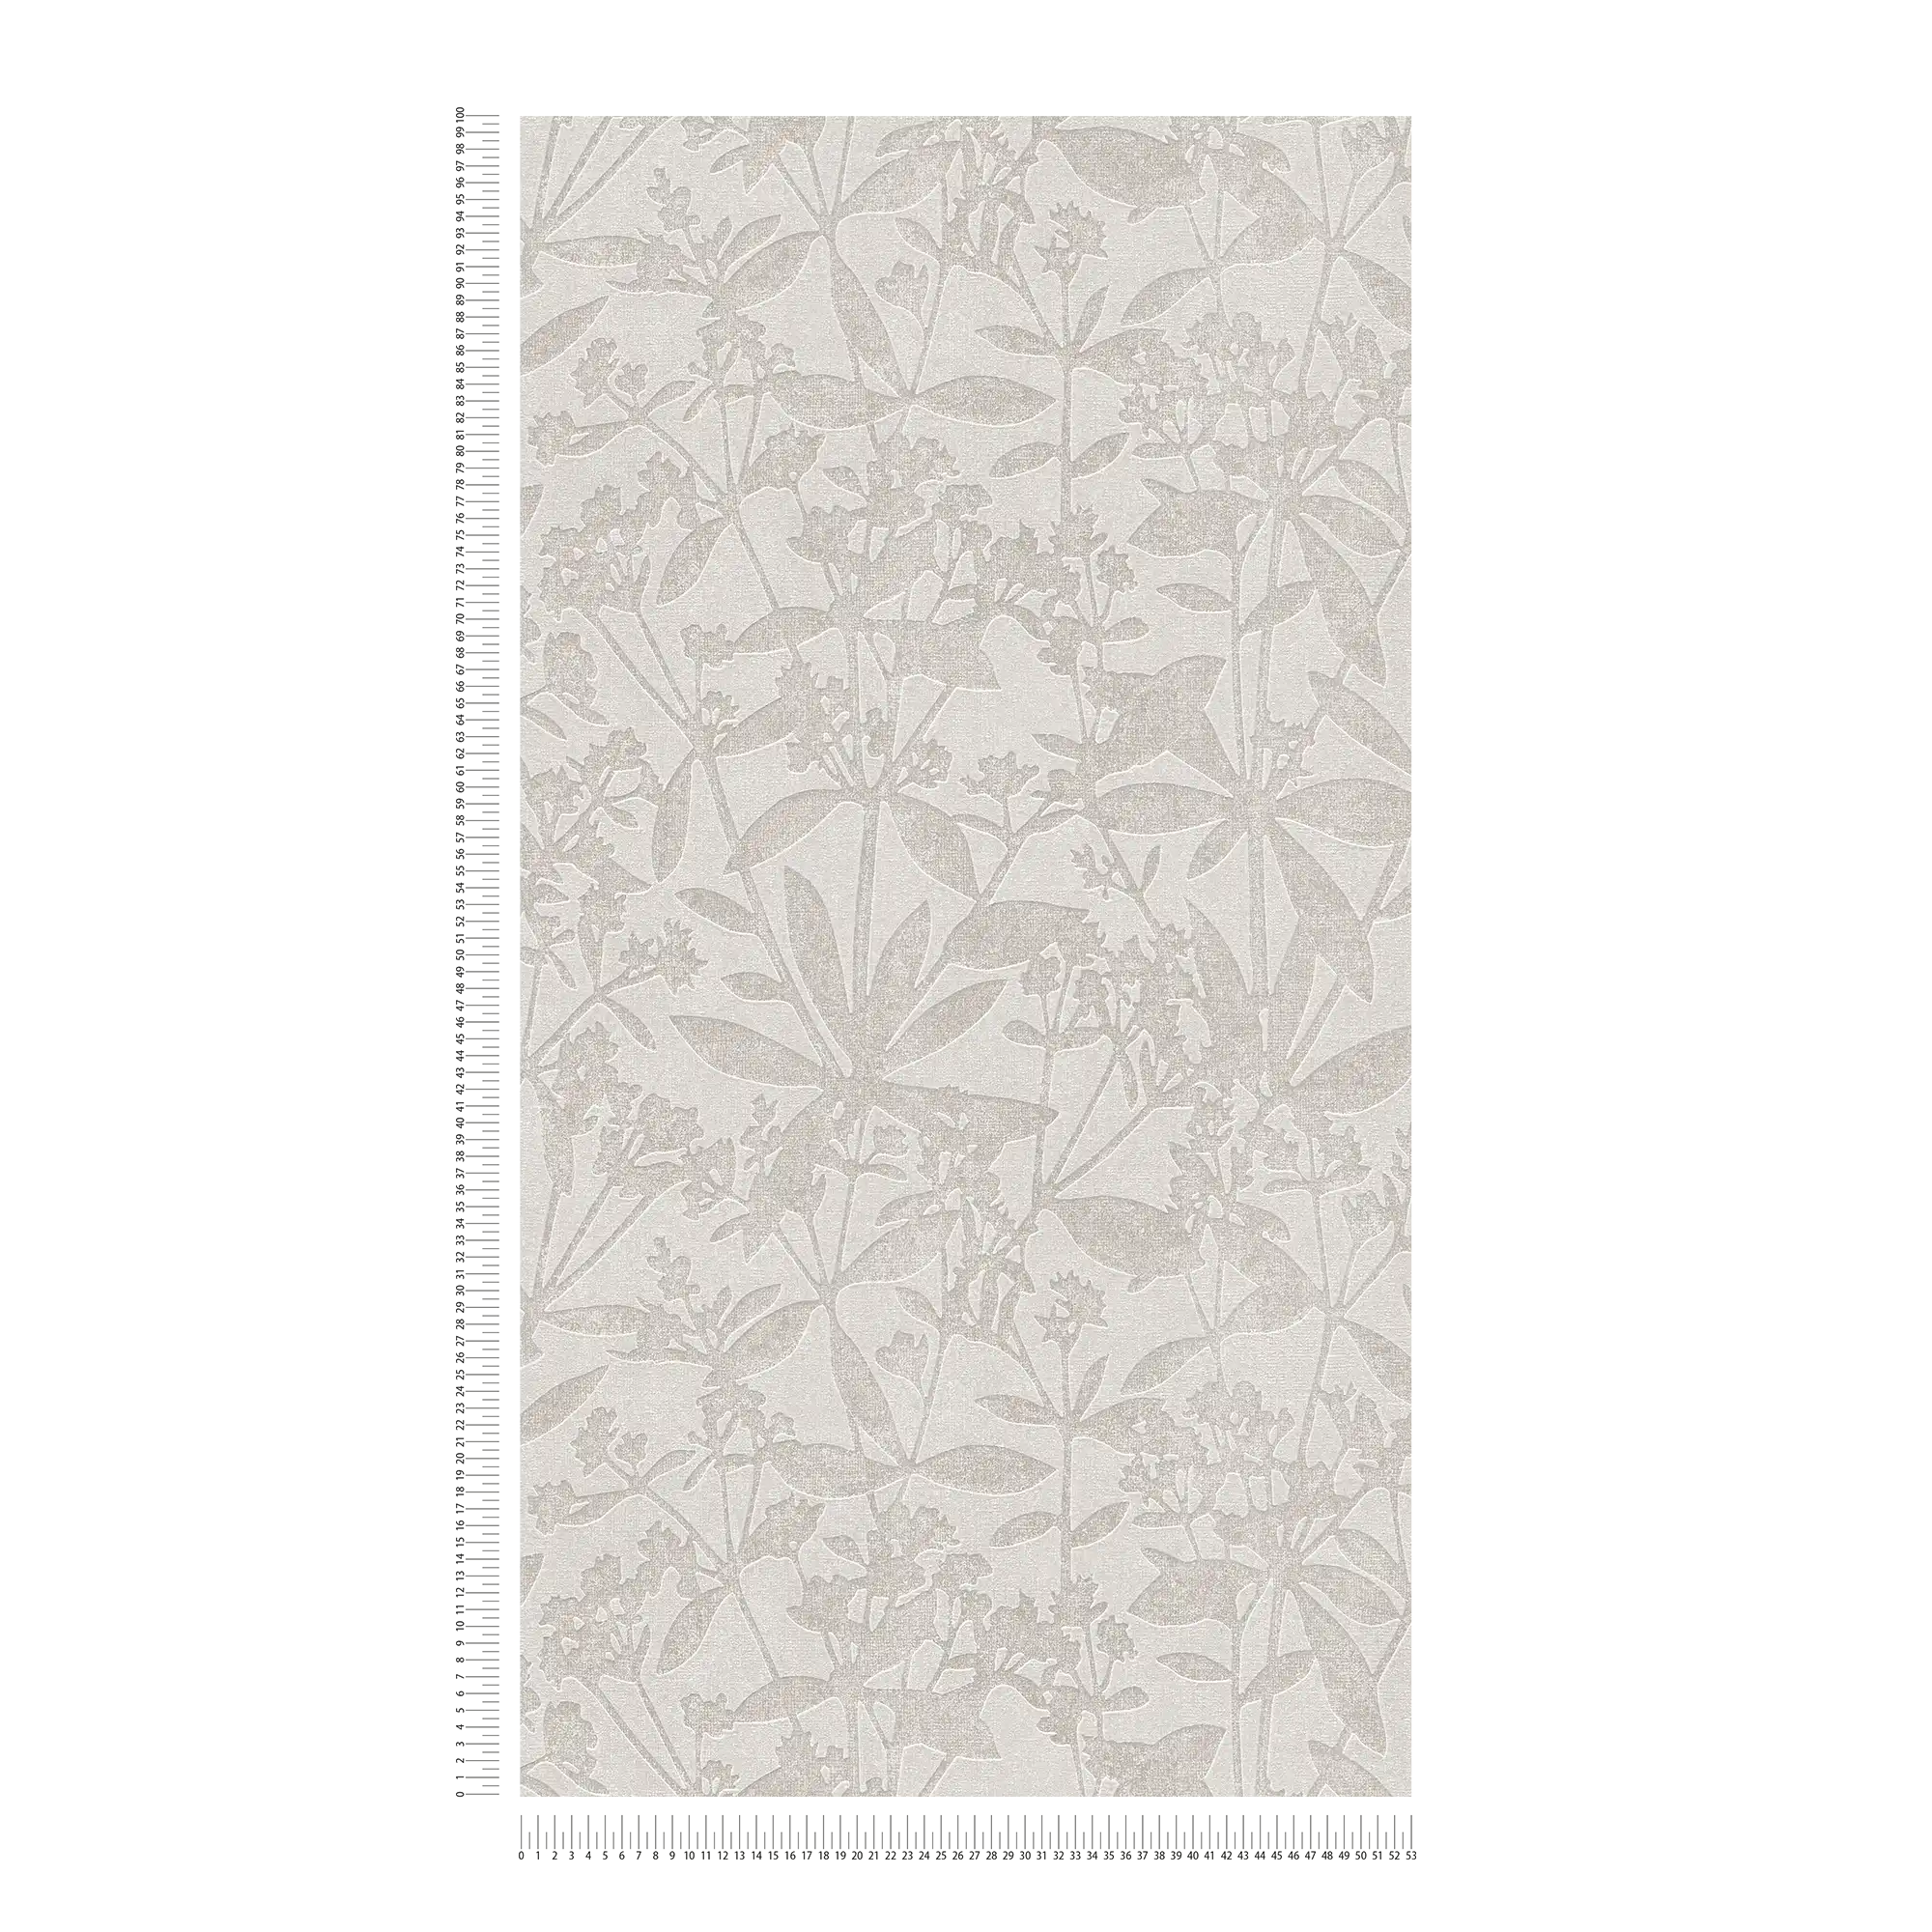             Non-woven wallpaper floral flowers and leaves - grey, beige
        